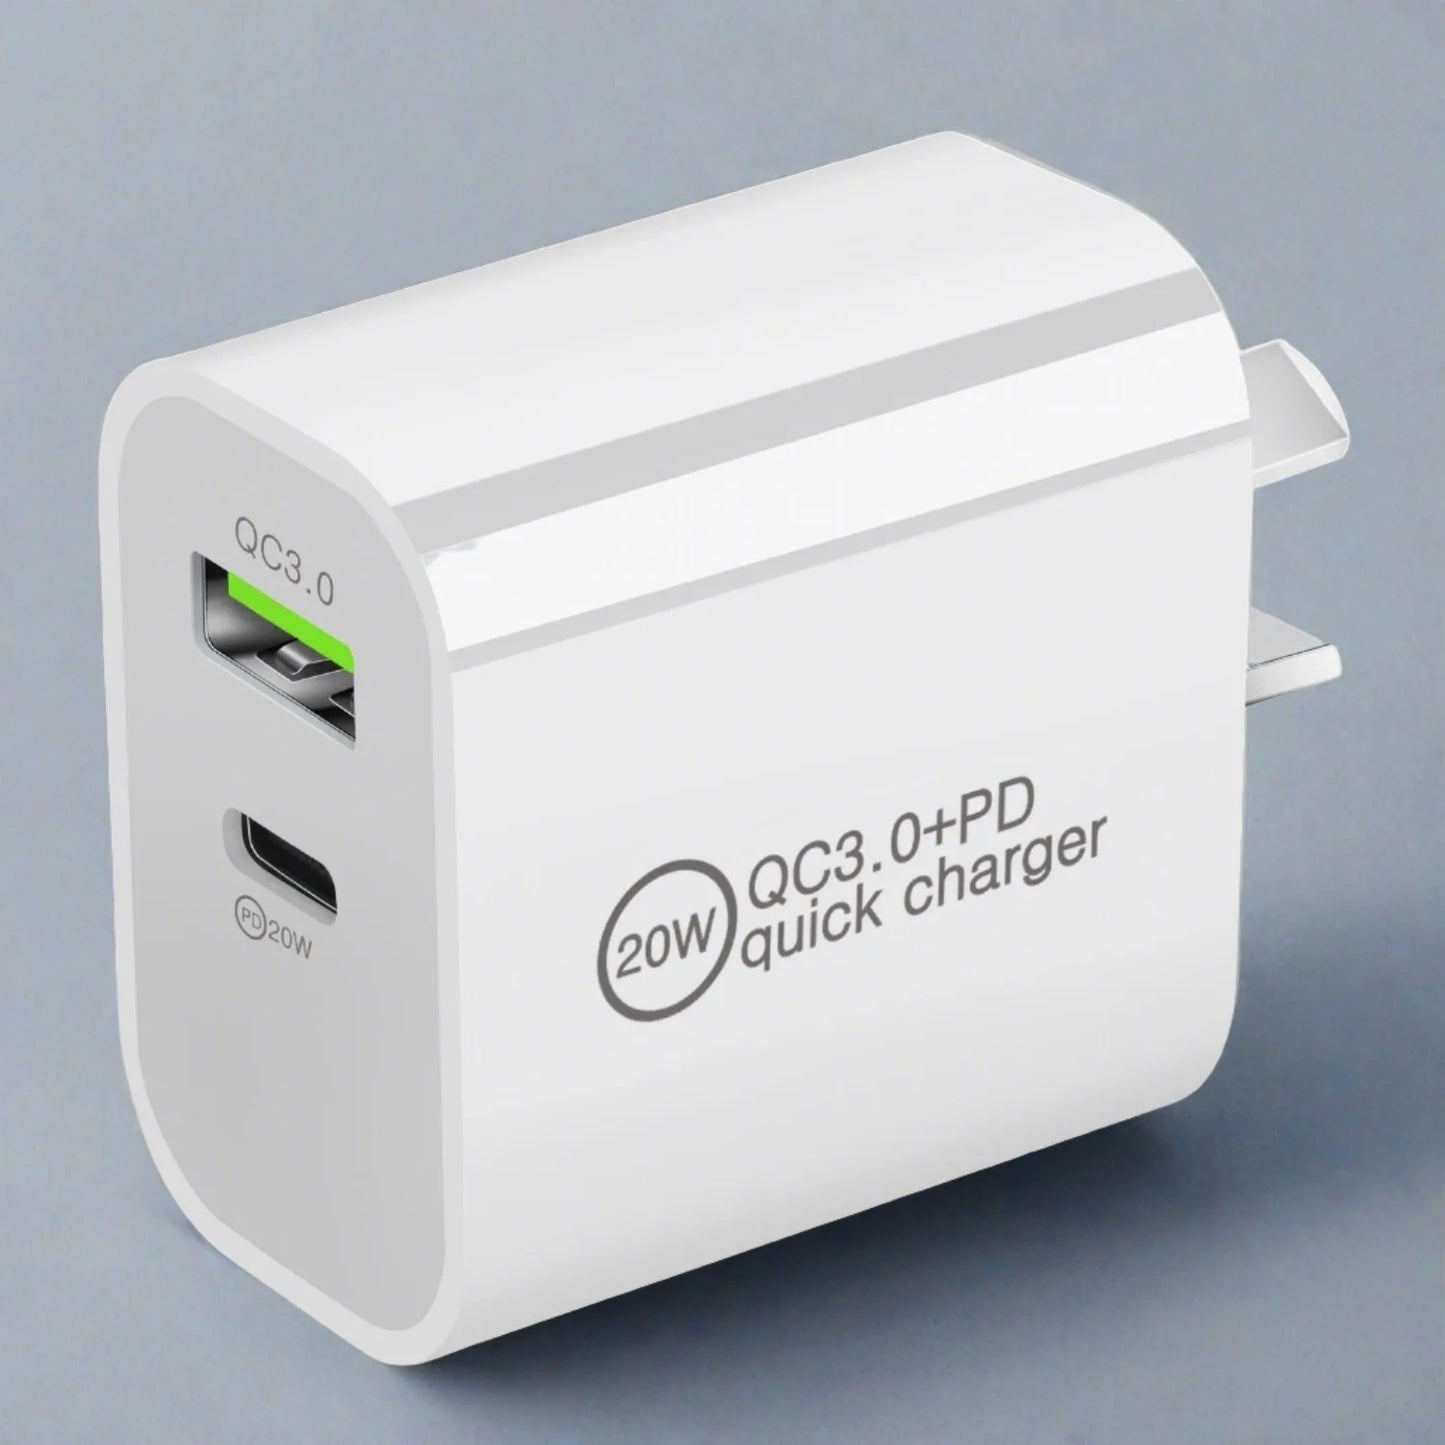 18W USB Quick Charger for CPAP Battery. PD Charger